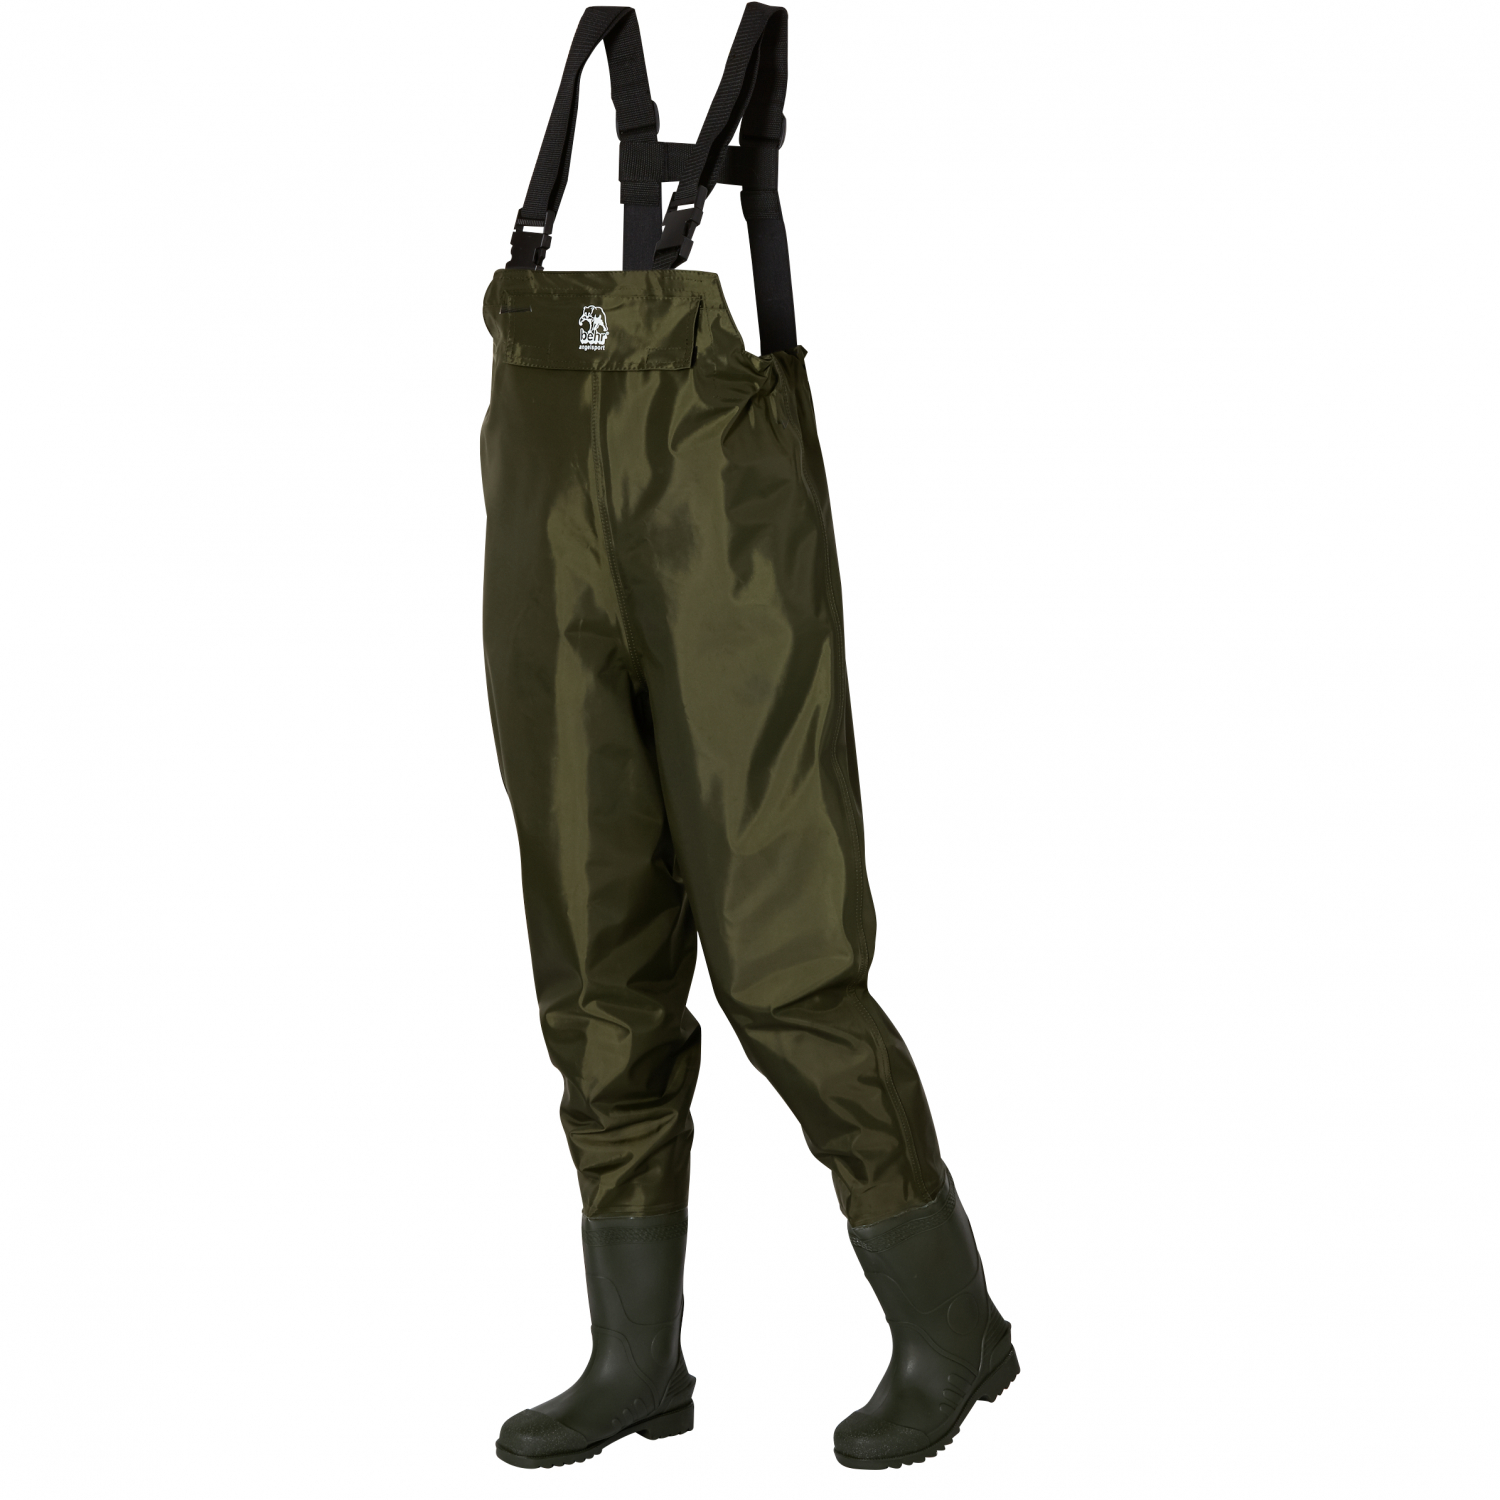 Behr Mens Waders Ultra Light at low prices